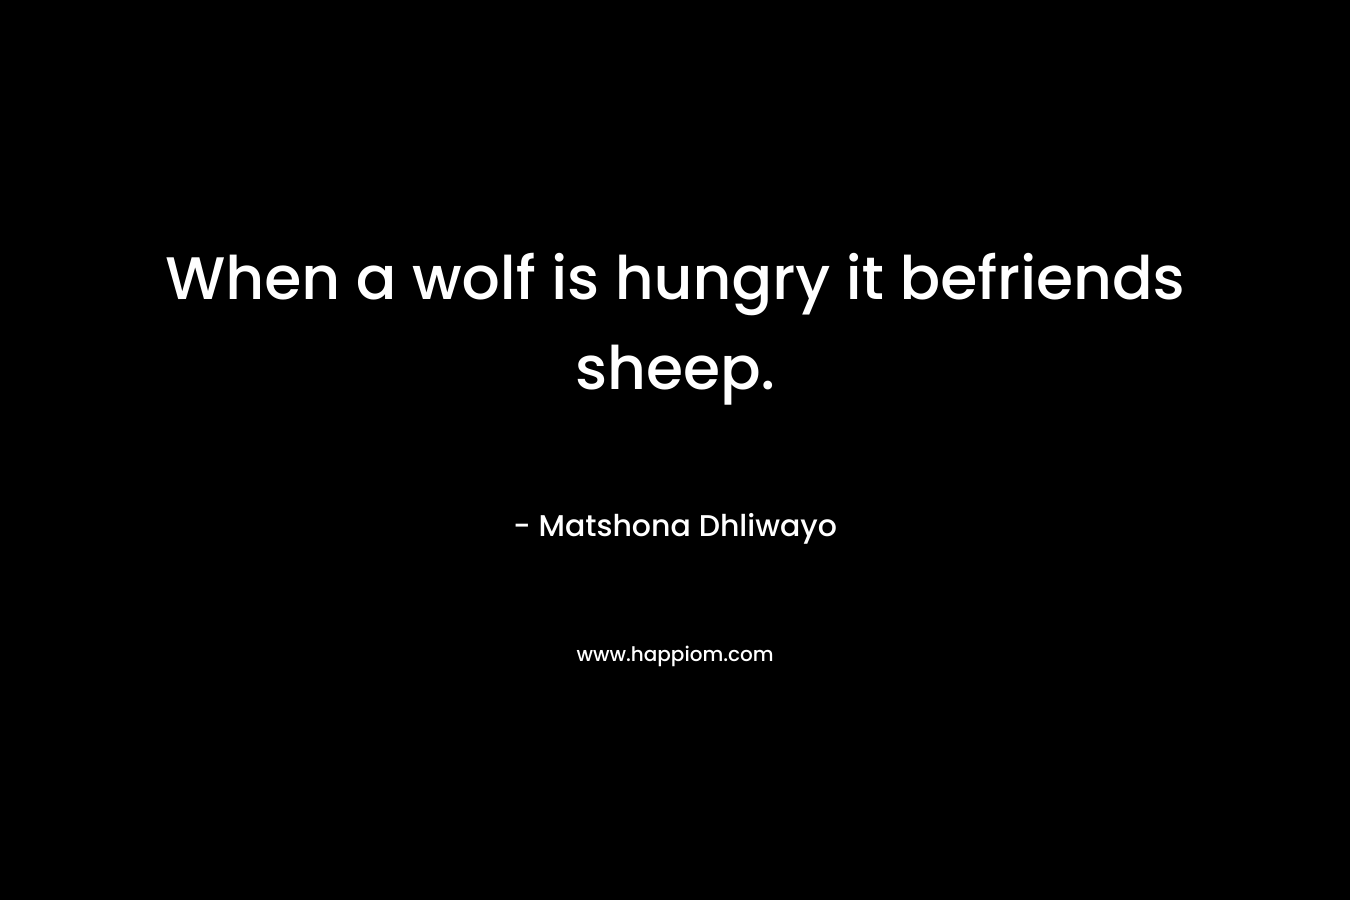 When a wolf is hungry it befriends sheep.